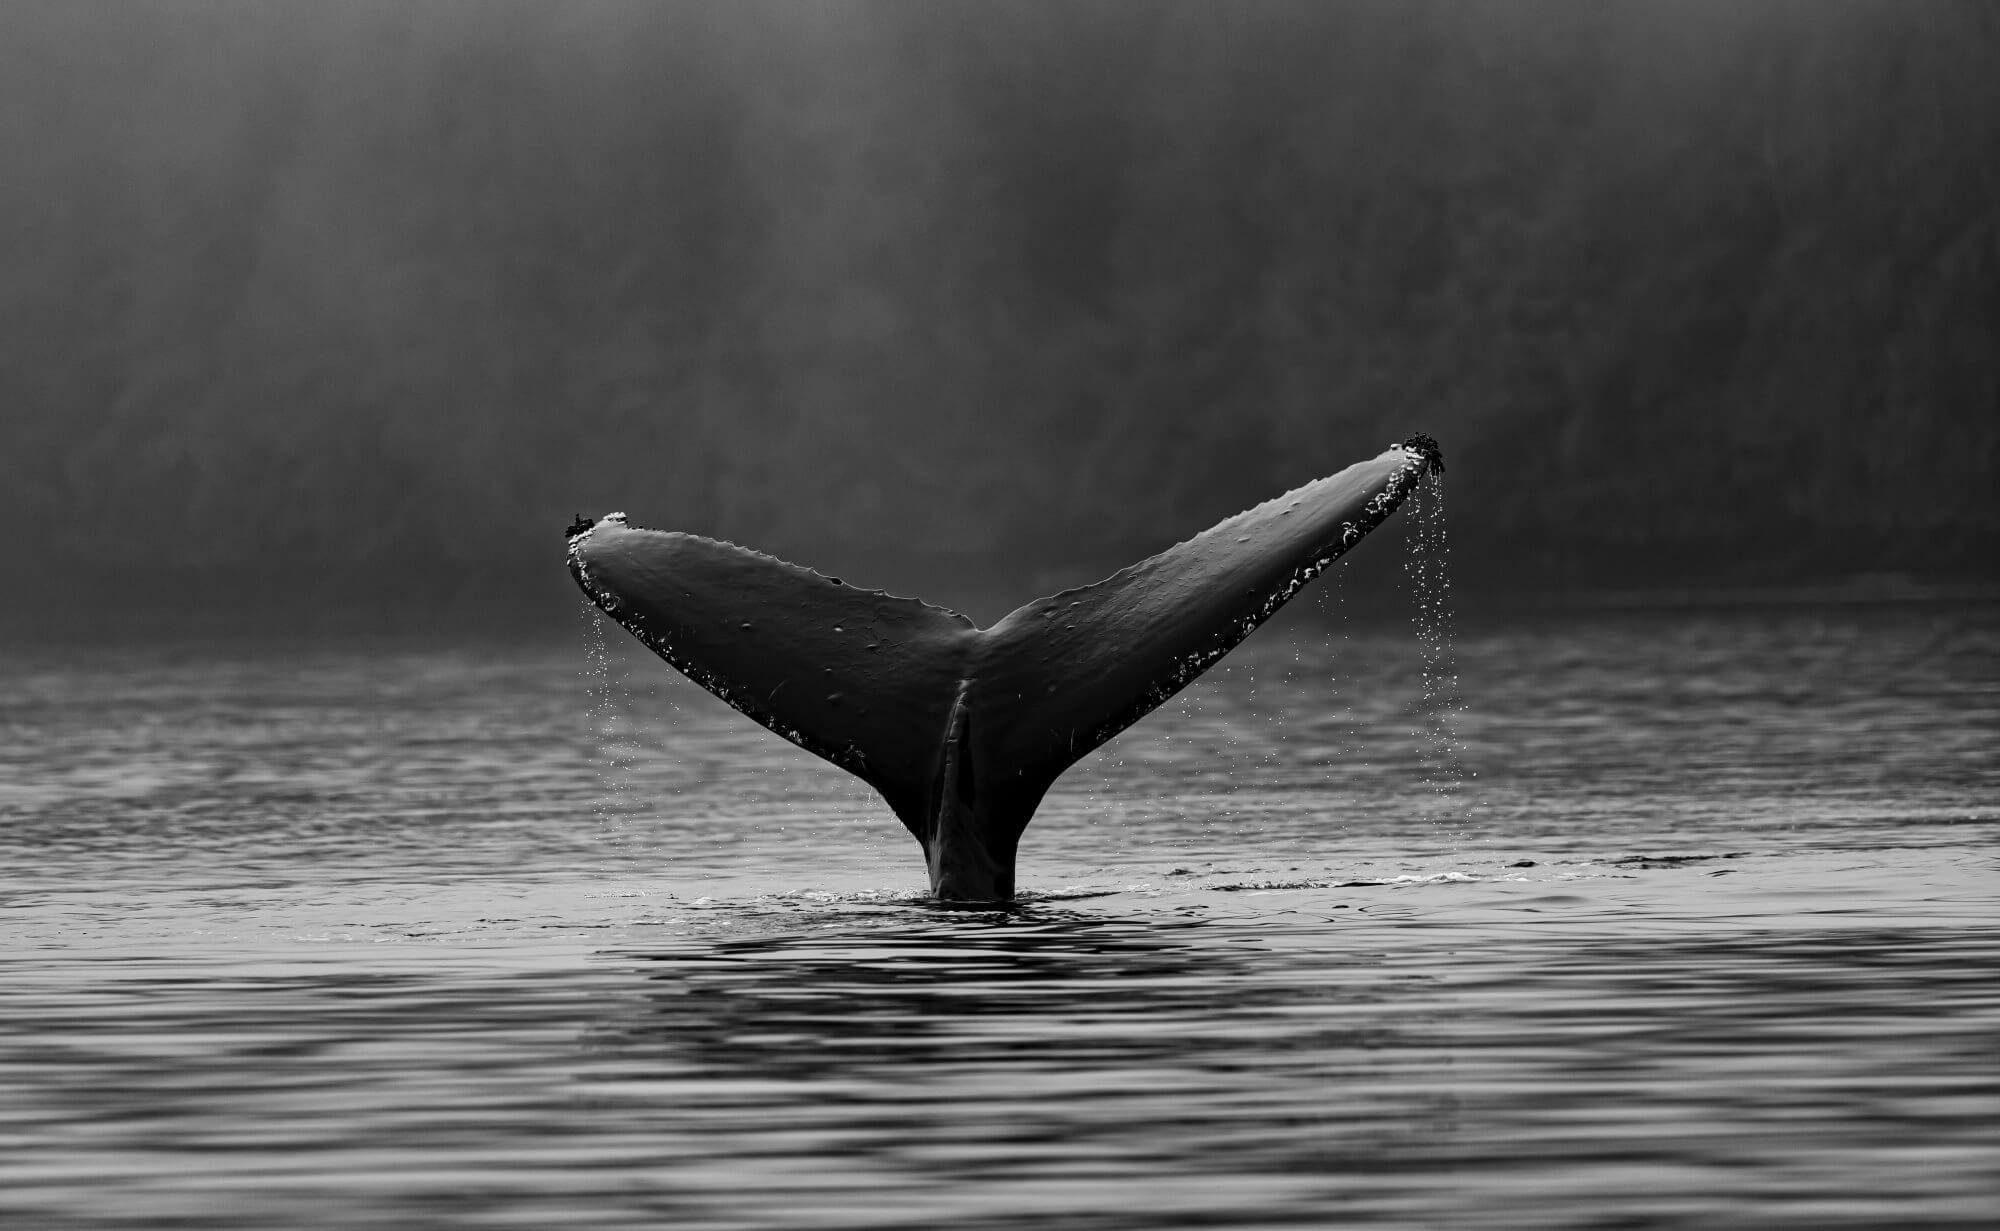 Whales can cope with global warming better trees